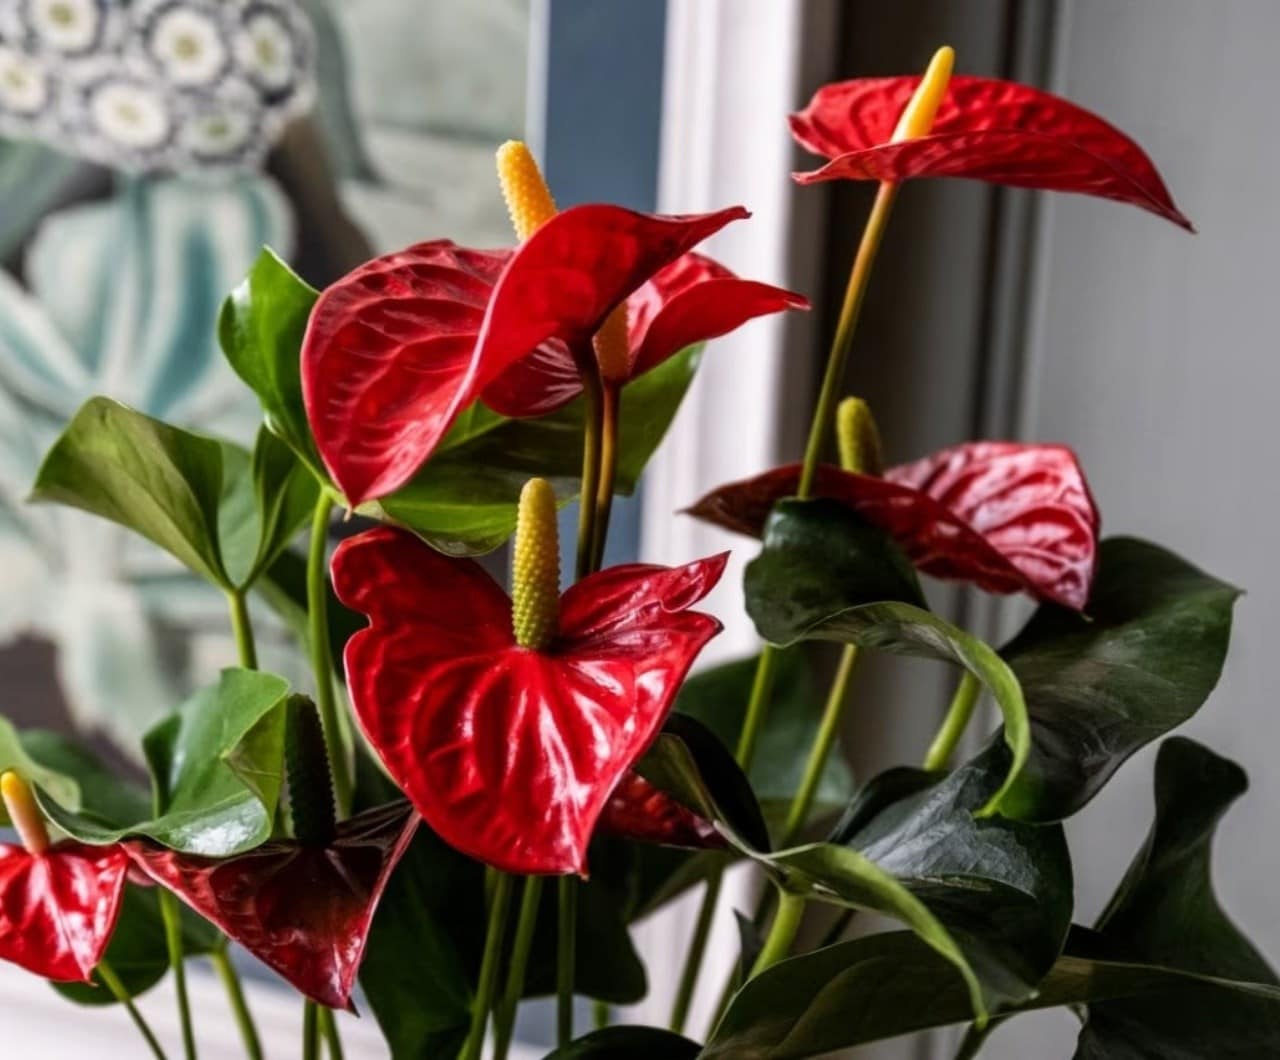 Care tips for indoor plants